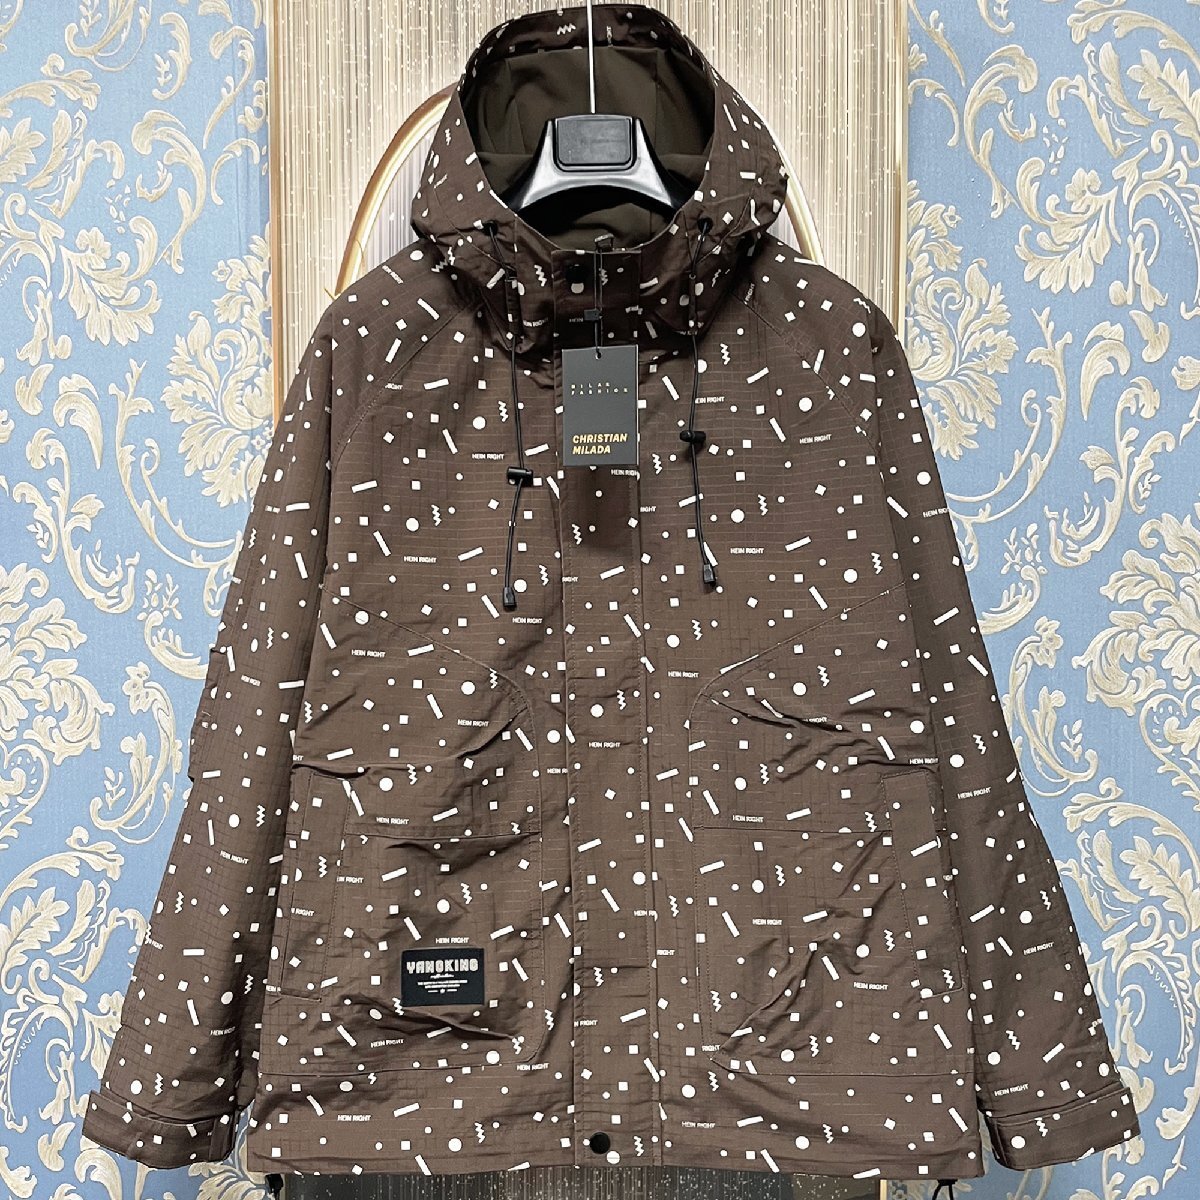  regular price 6 ten thousand *christian milada* milano departure * jacket * high class protection against cold . manner thin total pattern piece . outer dressing up mountain parka L/48 size 